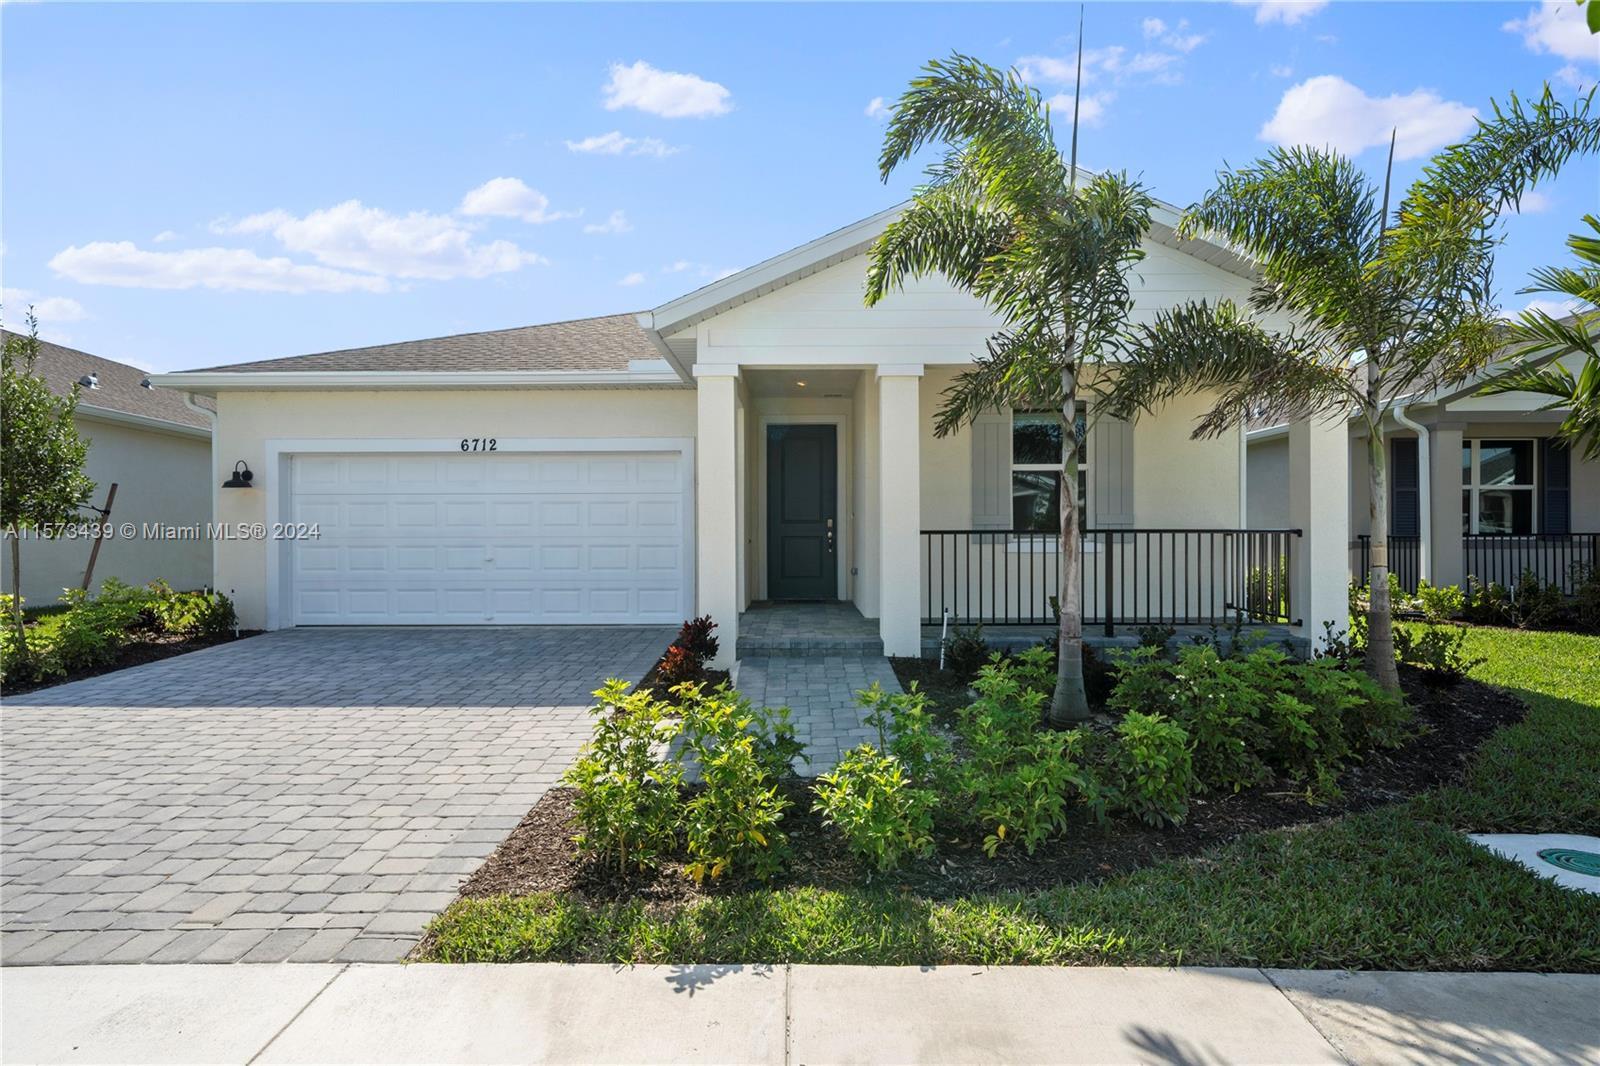 Photo of 6512 NW Cloverdale Dr in Port St Lucie, FL